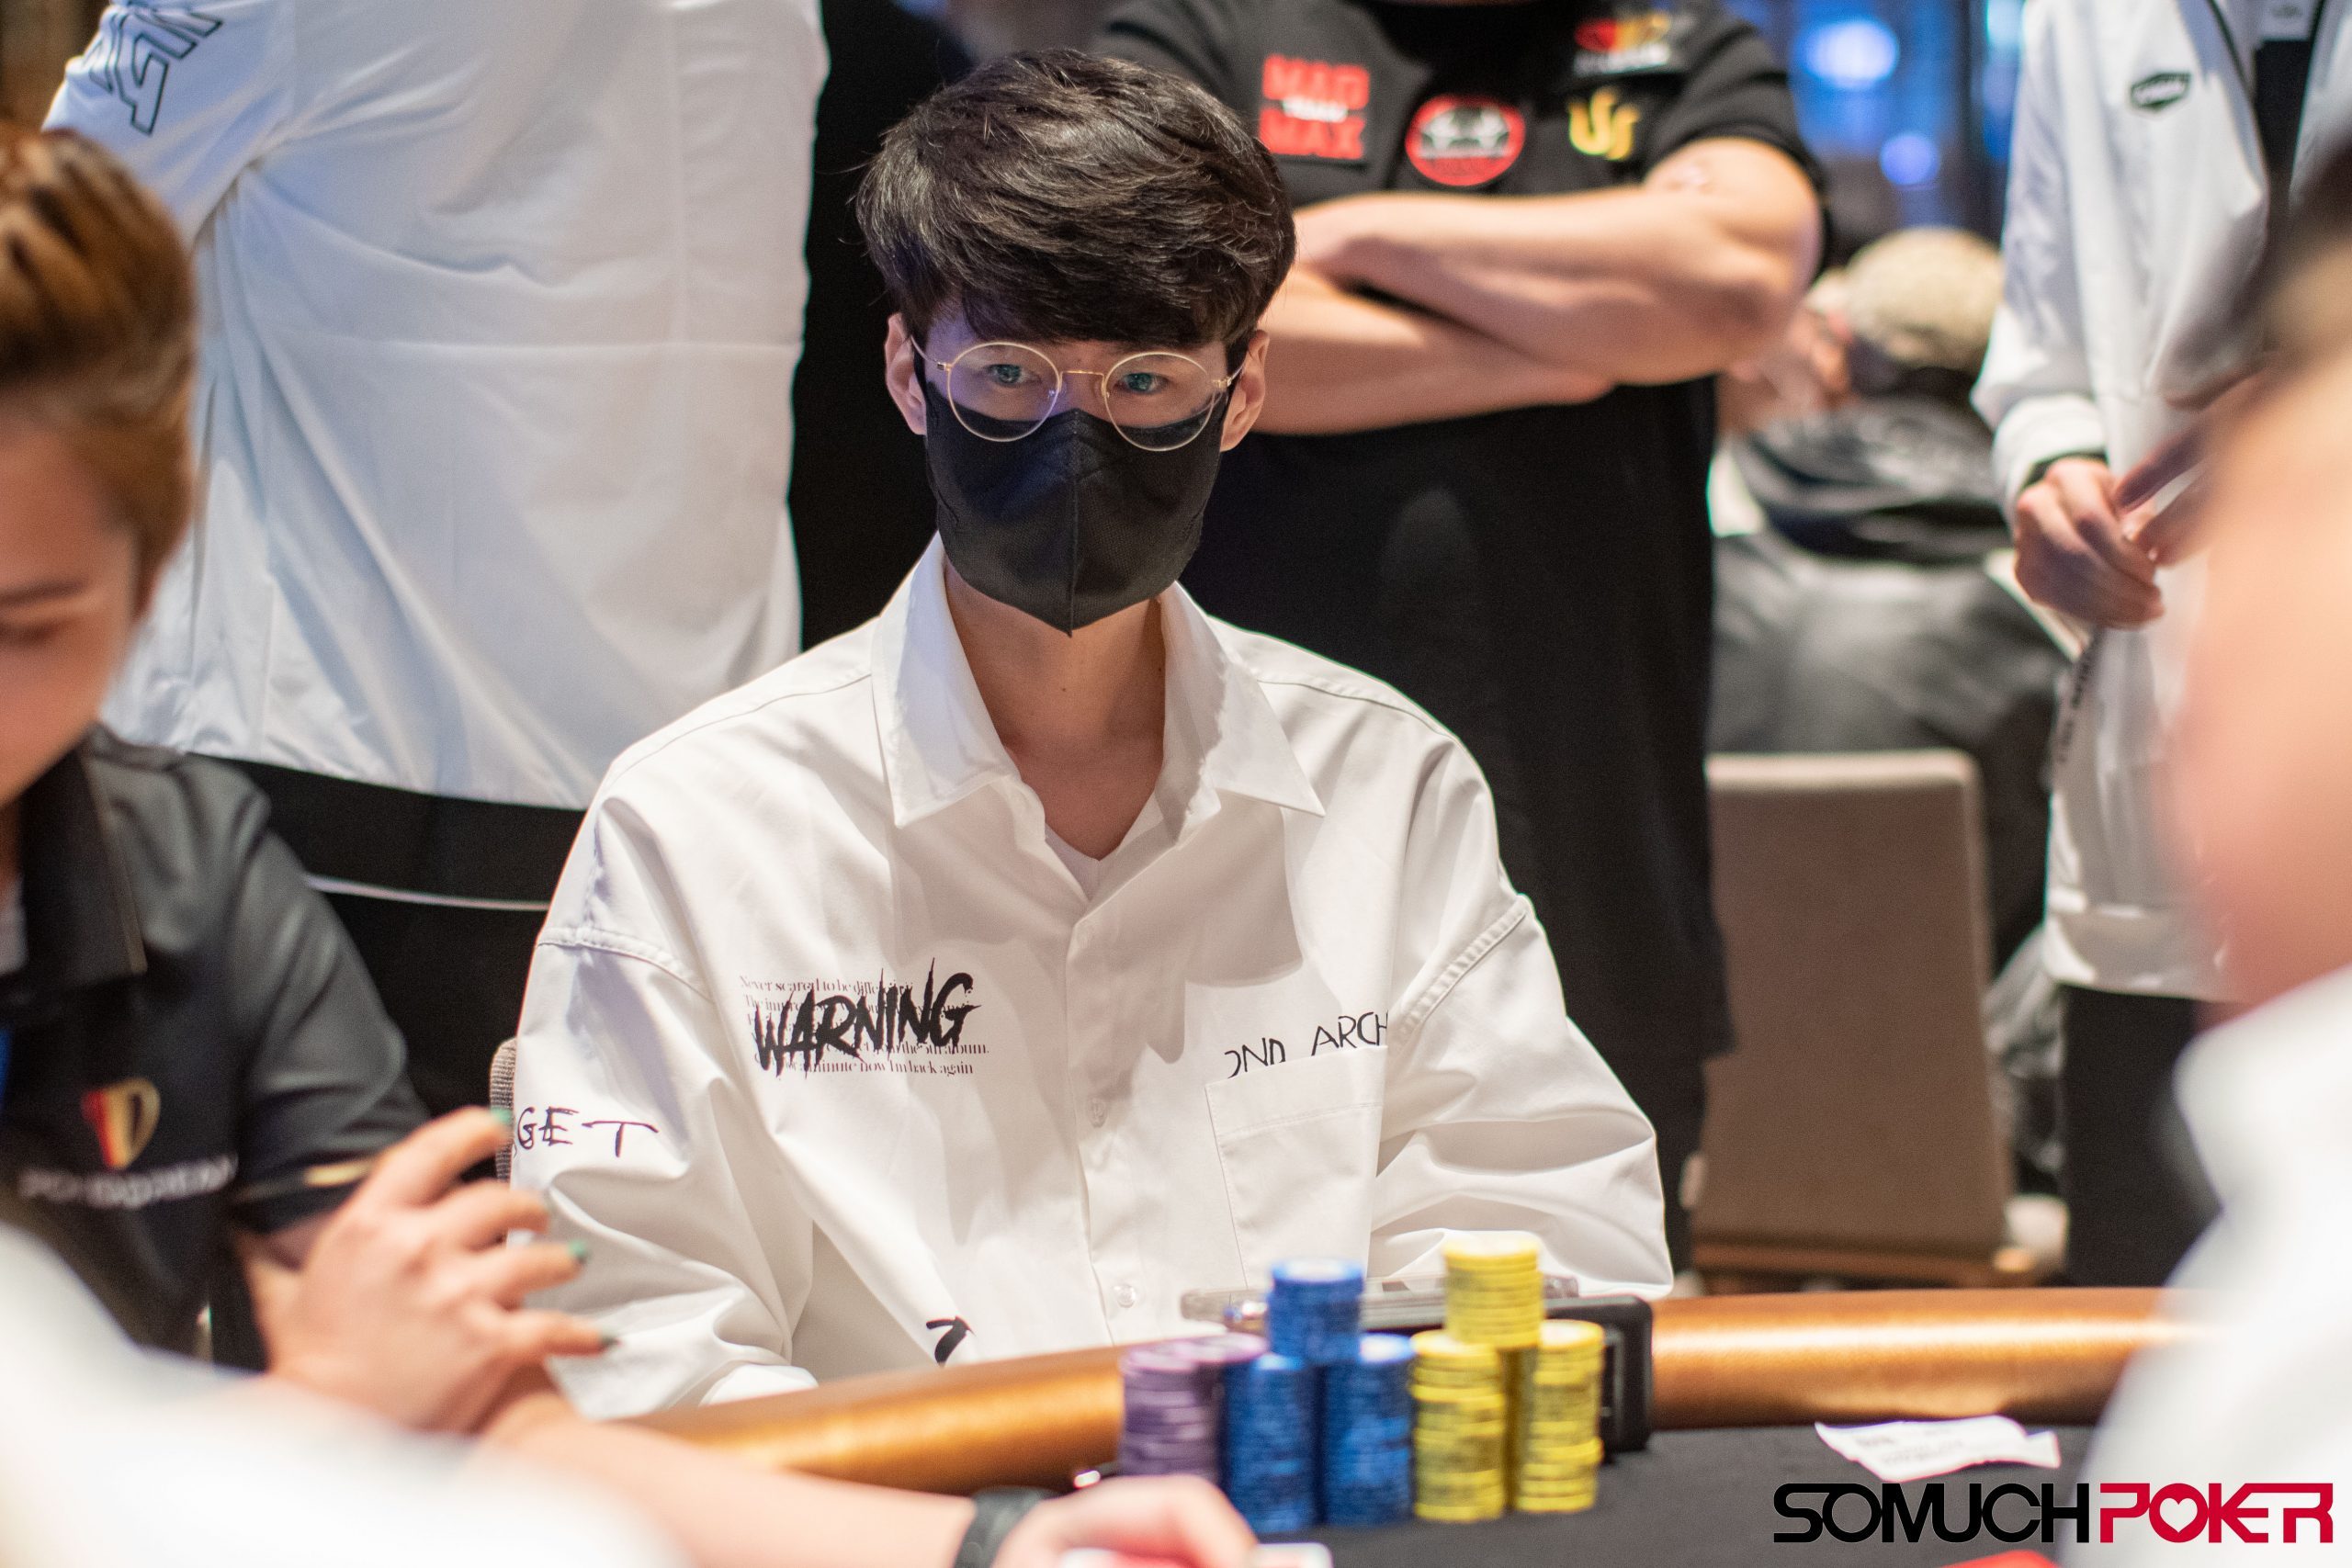 Poker Dream Vietnam: Hojin Kim bags the lead at Main Event Day 1A; 72 players advance out of 293 entries